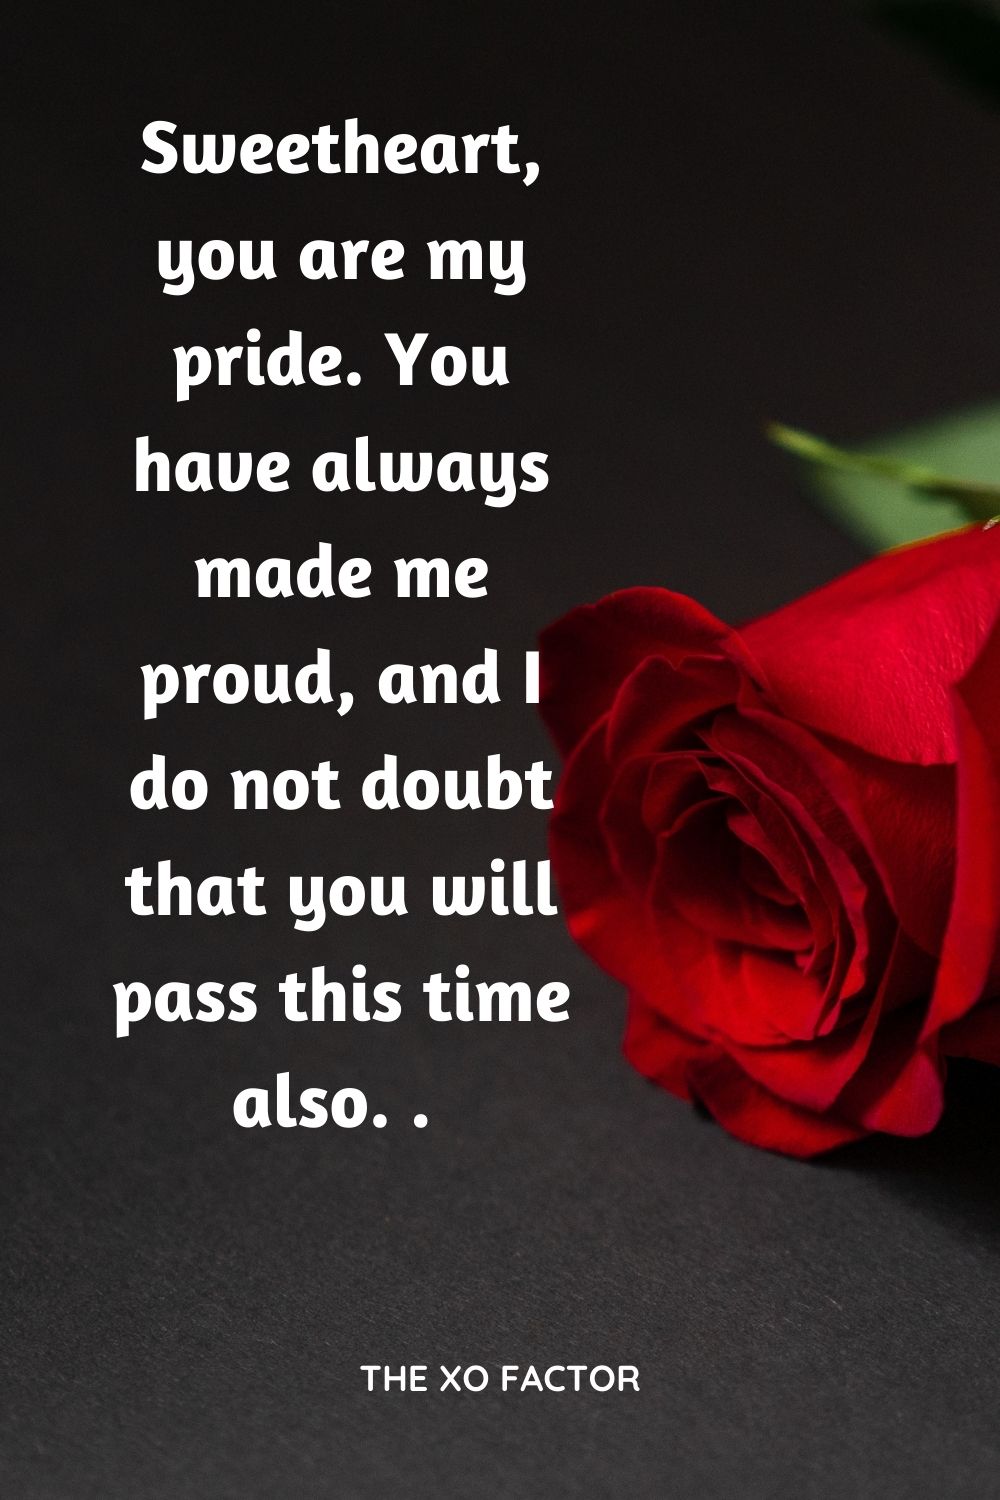 Sweetheart, you are my pride. You have always made me proud, and I do not doubt that you will pass this time also. . 